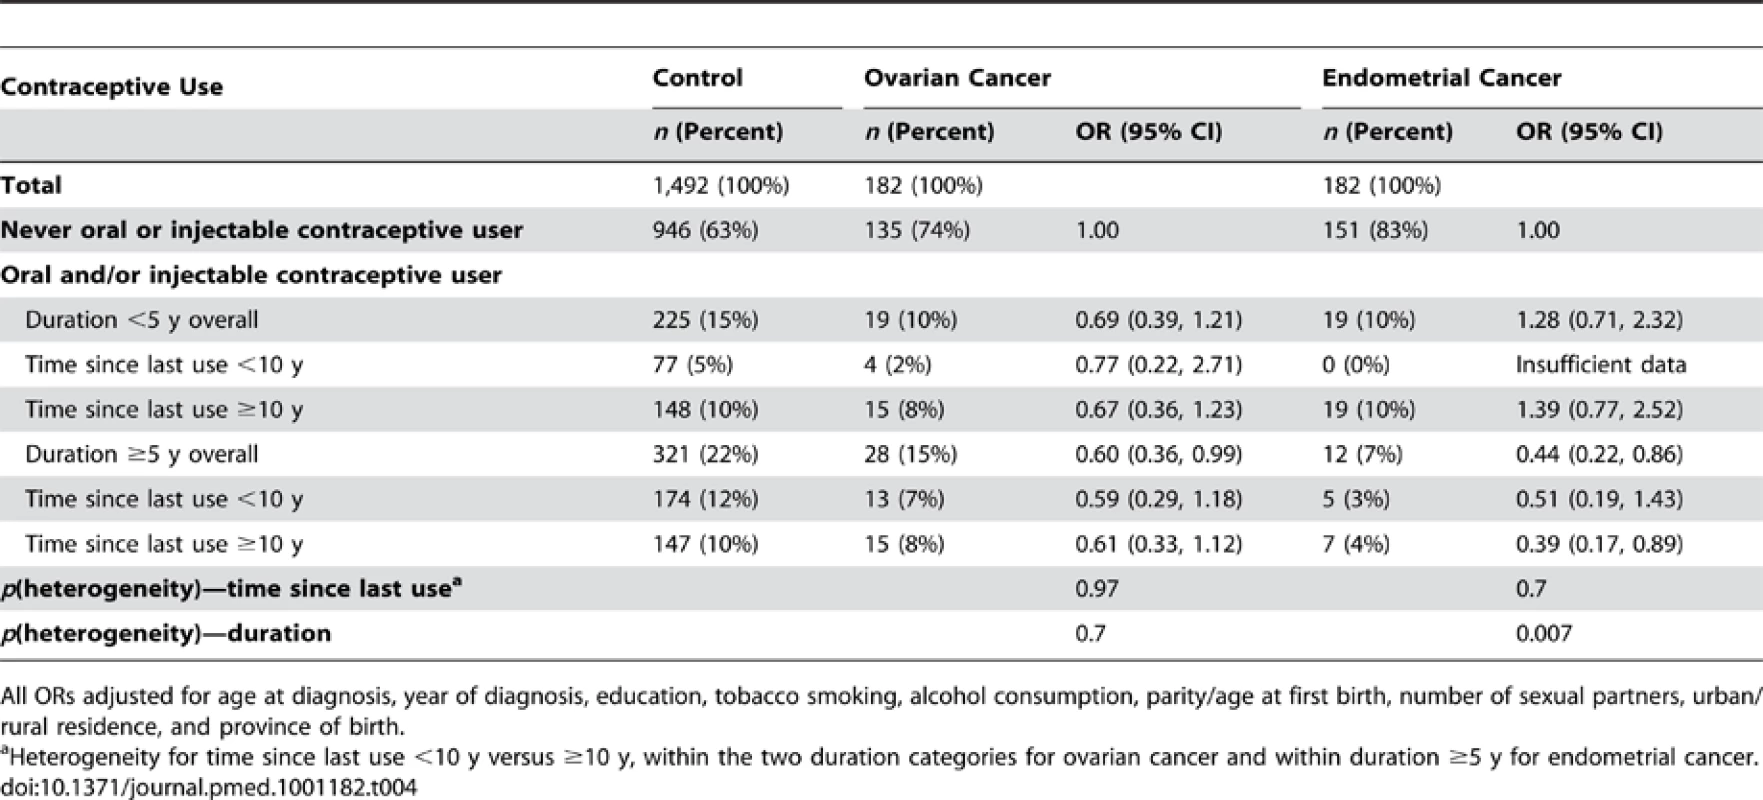 Adjusted odds ratios for ovarian and endometrial cancer, according to duration of use and time since last use of oral and injectable contraceptives.